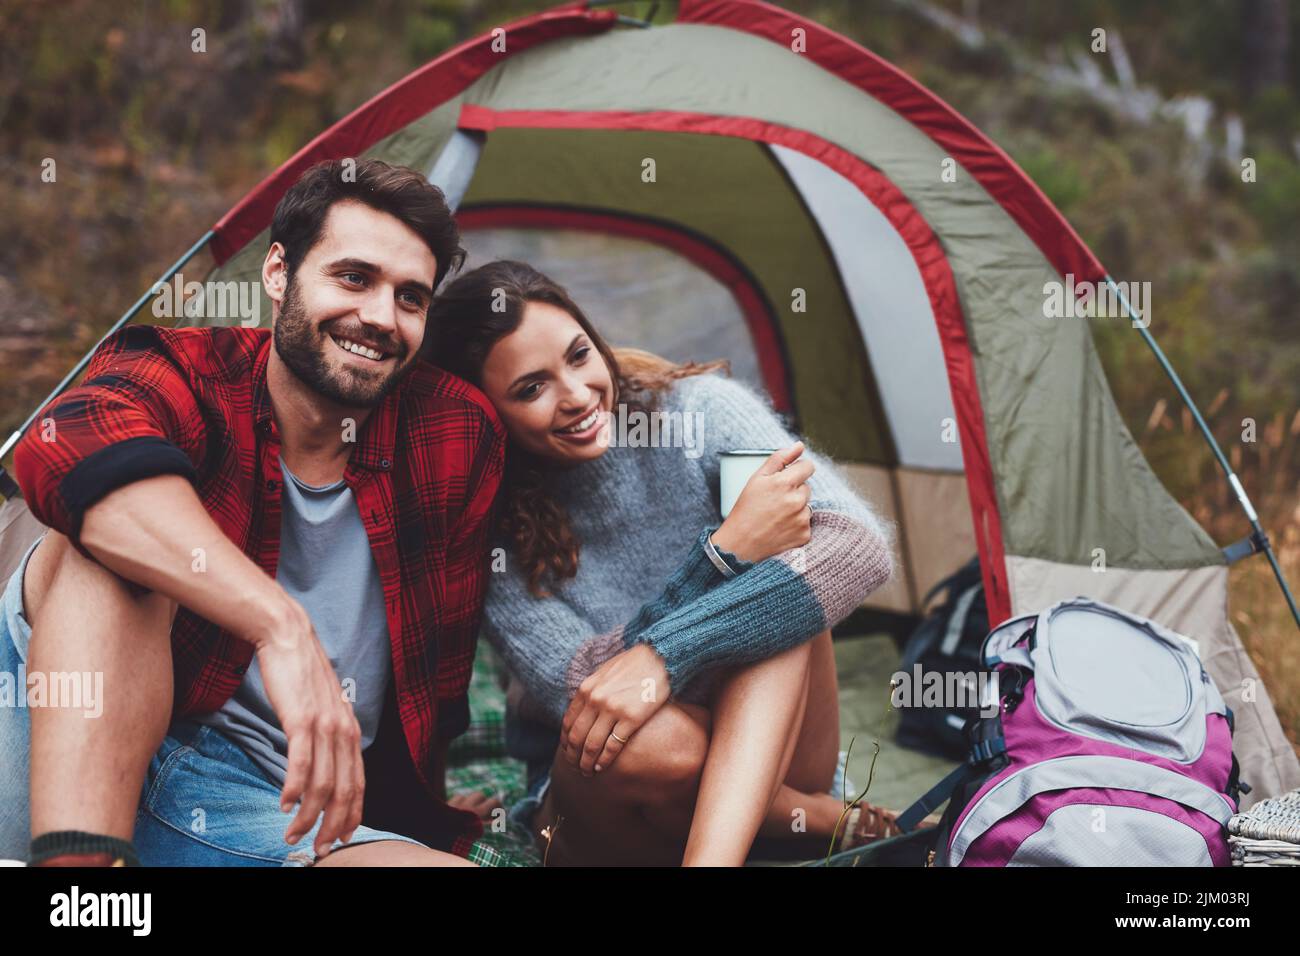 Loving couple smiling happily while sitting outside their tent. Young couple relaxing and spending quality time together on a camping holiday. Stock Photo